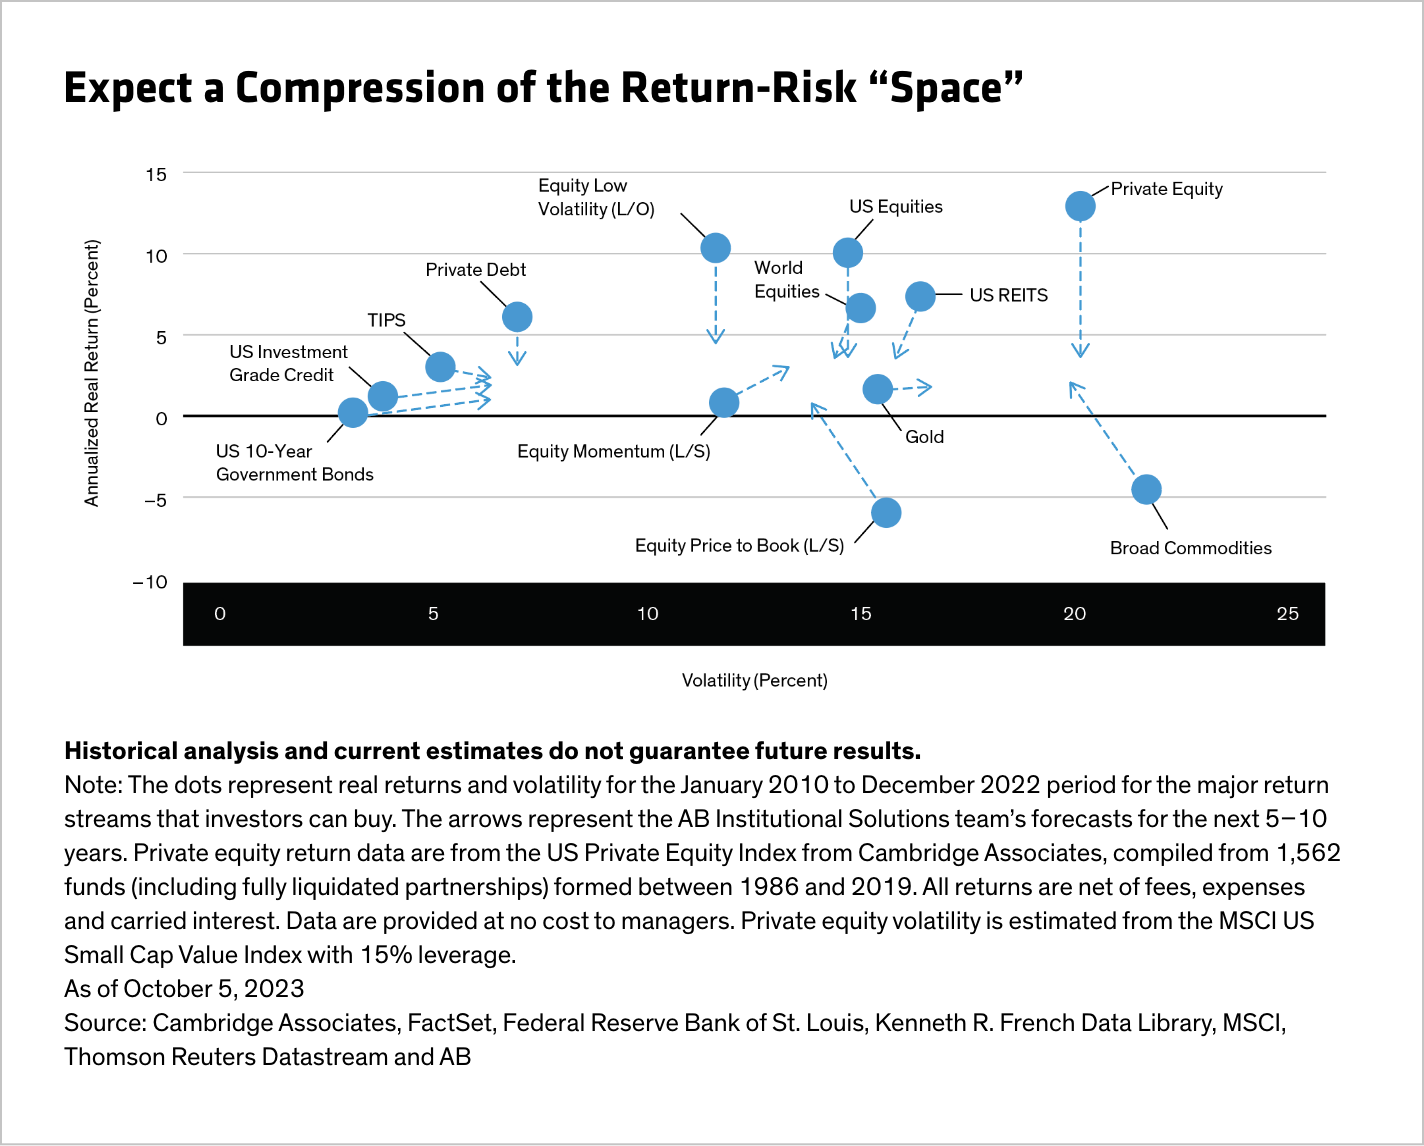 Expect a Compression of the Return-Risk “Space”